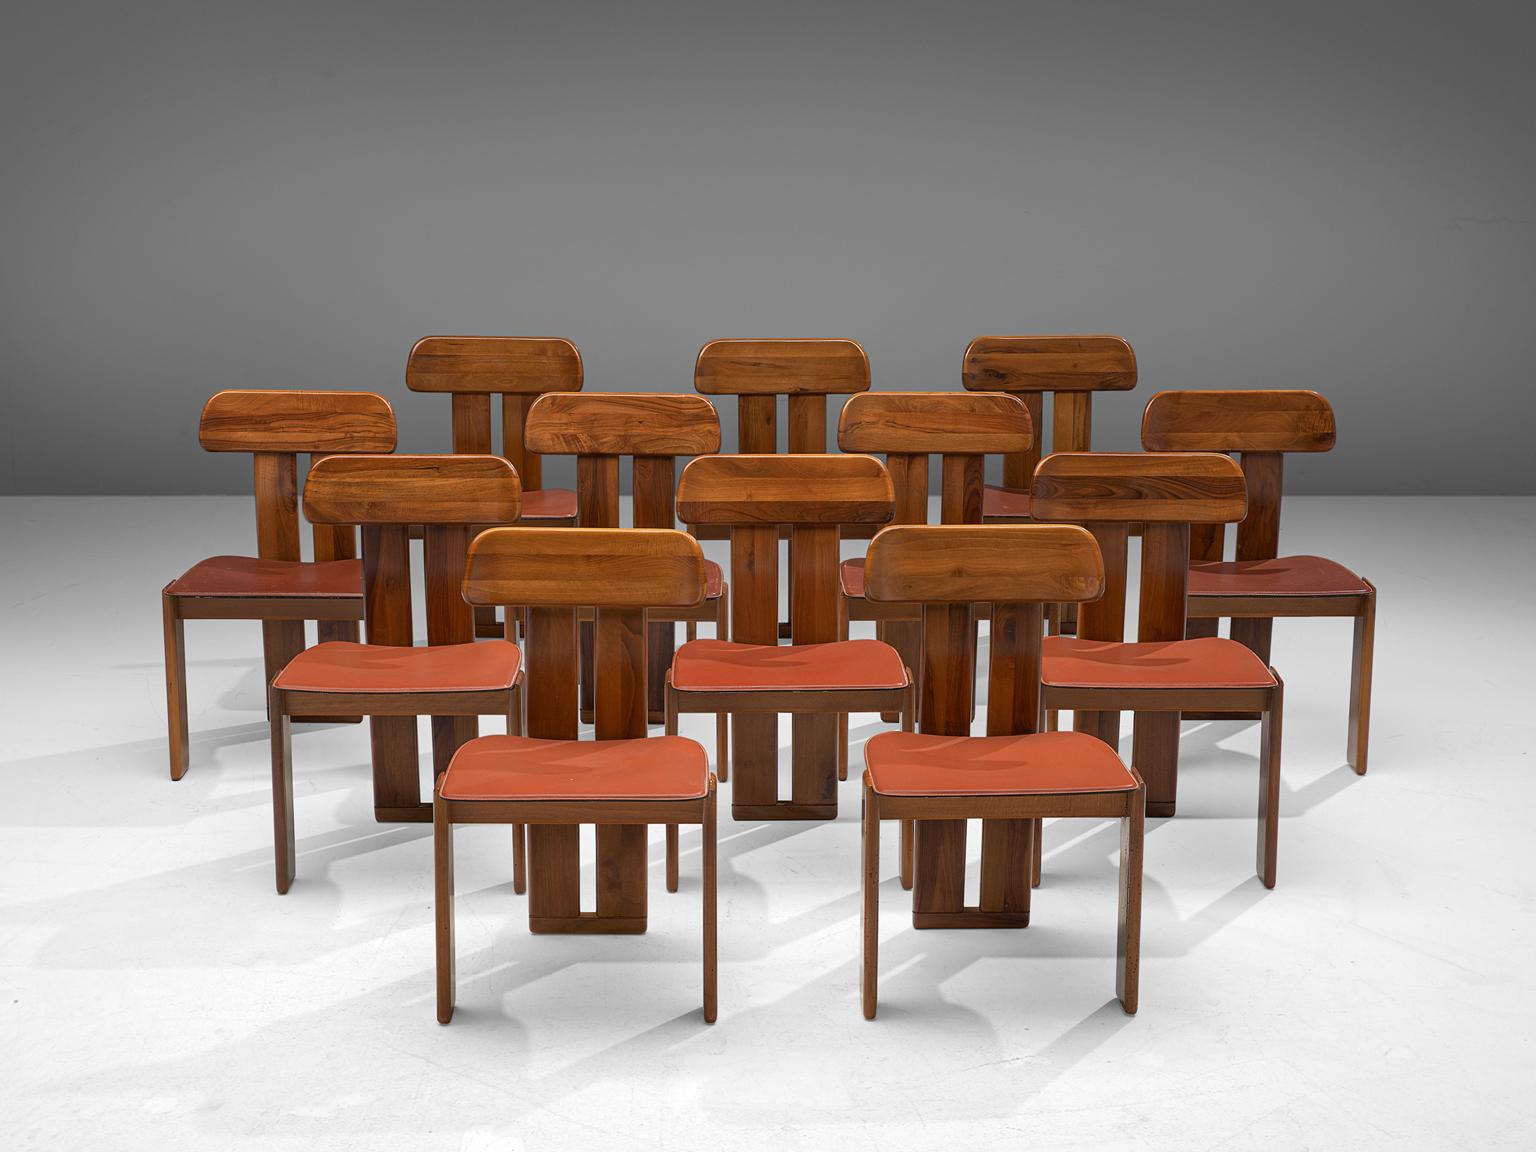 Sapporo for Mobil Girgi, set of 12 dining chairs, Italian walnut and red leather, Italy, 1970s.

Set of sculptural chairs that feature wonderful backrests, consisting of two vertical slats distanced from each other. At the bottom and top these are